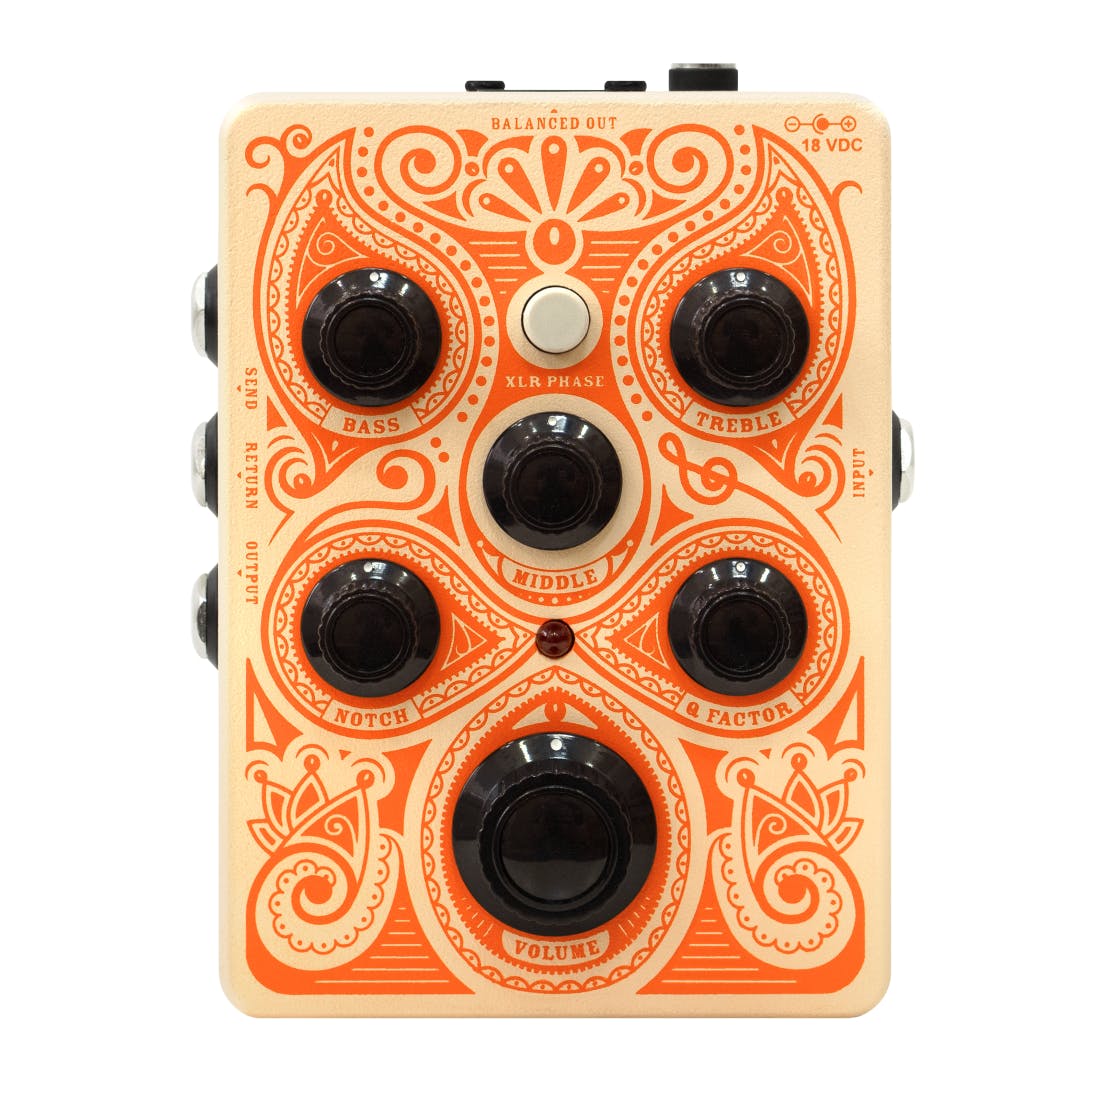 Orange Amps Acoustic Guitar Effects Preamp Pedal with EQ Controls, Buffered FX Loop, XLR Output